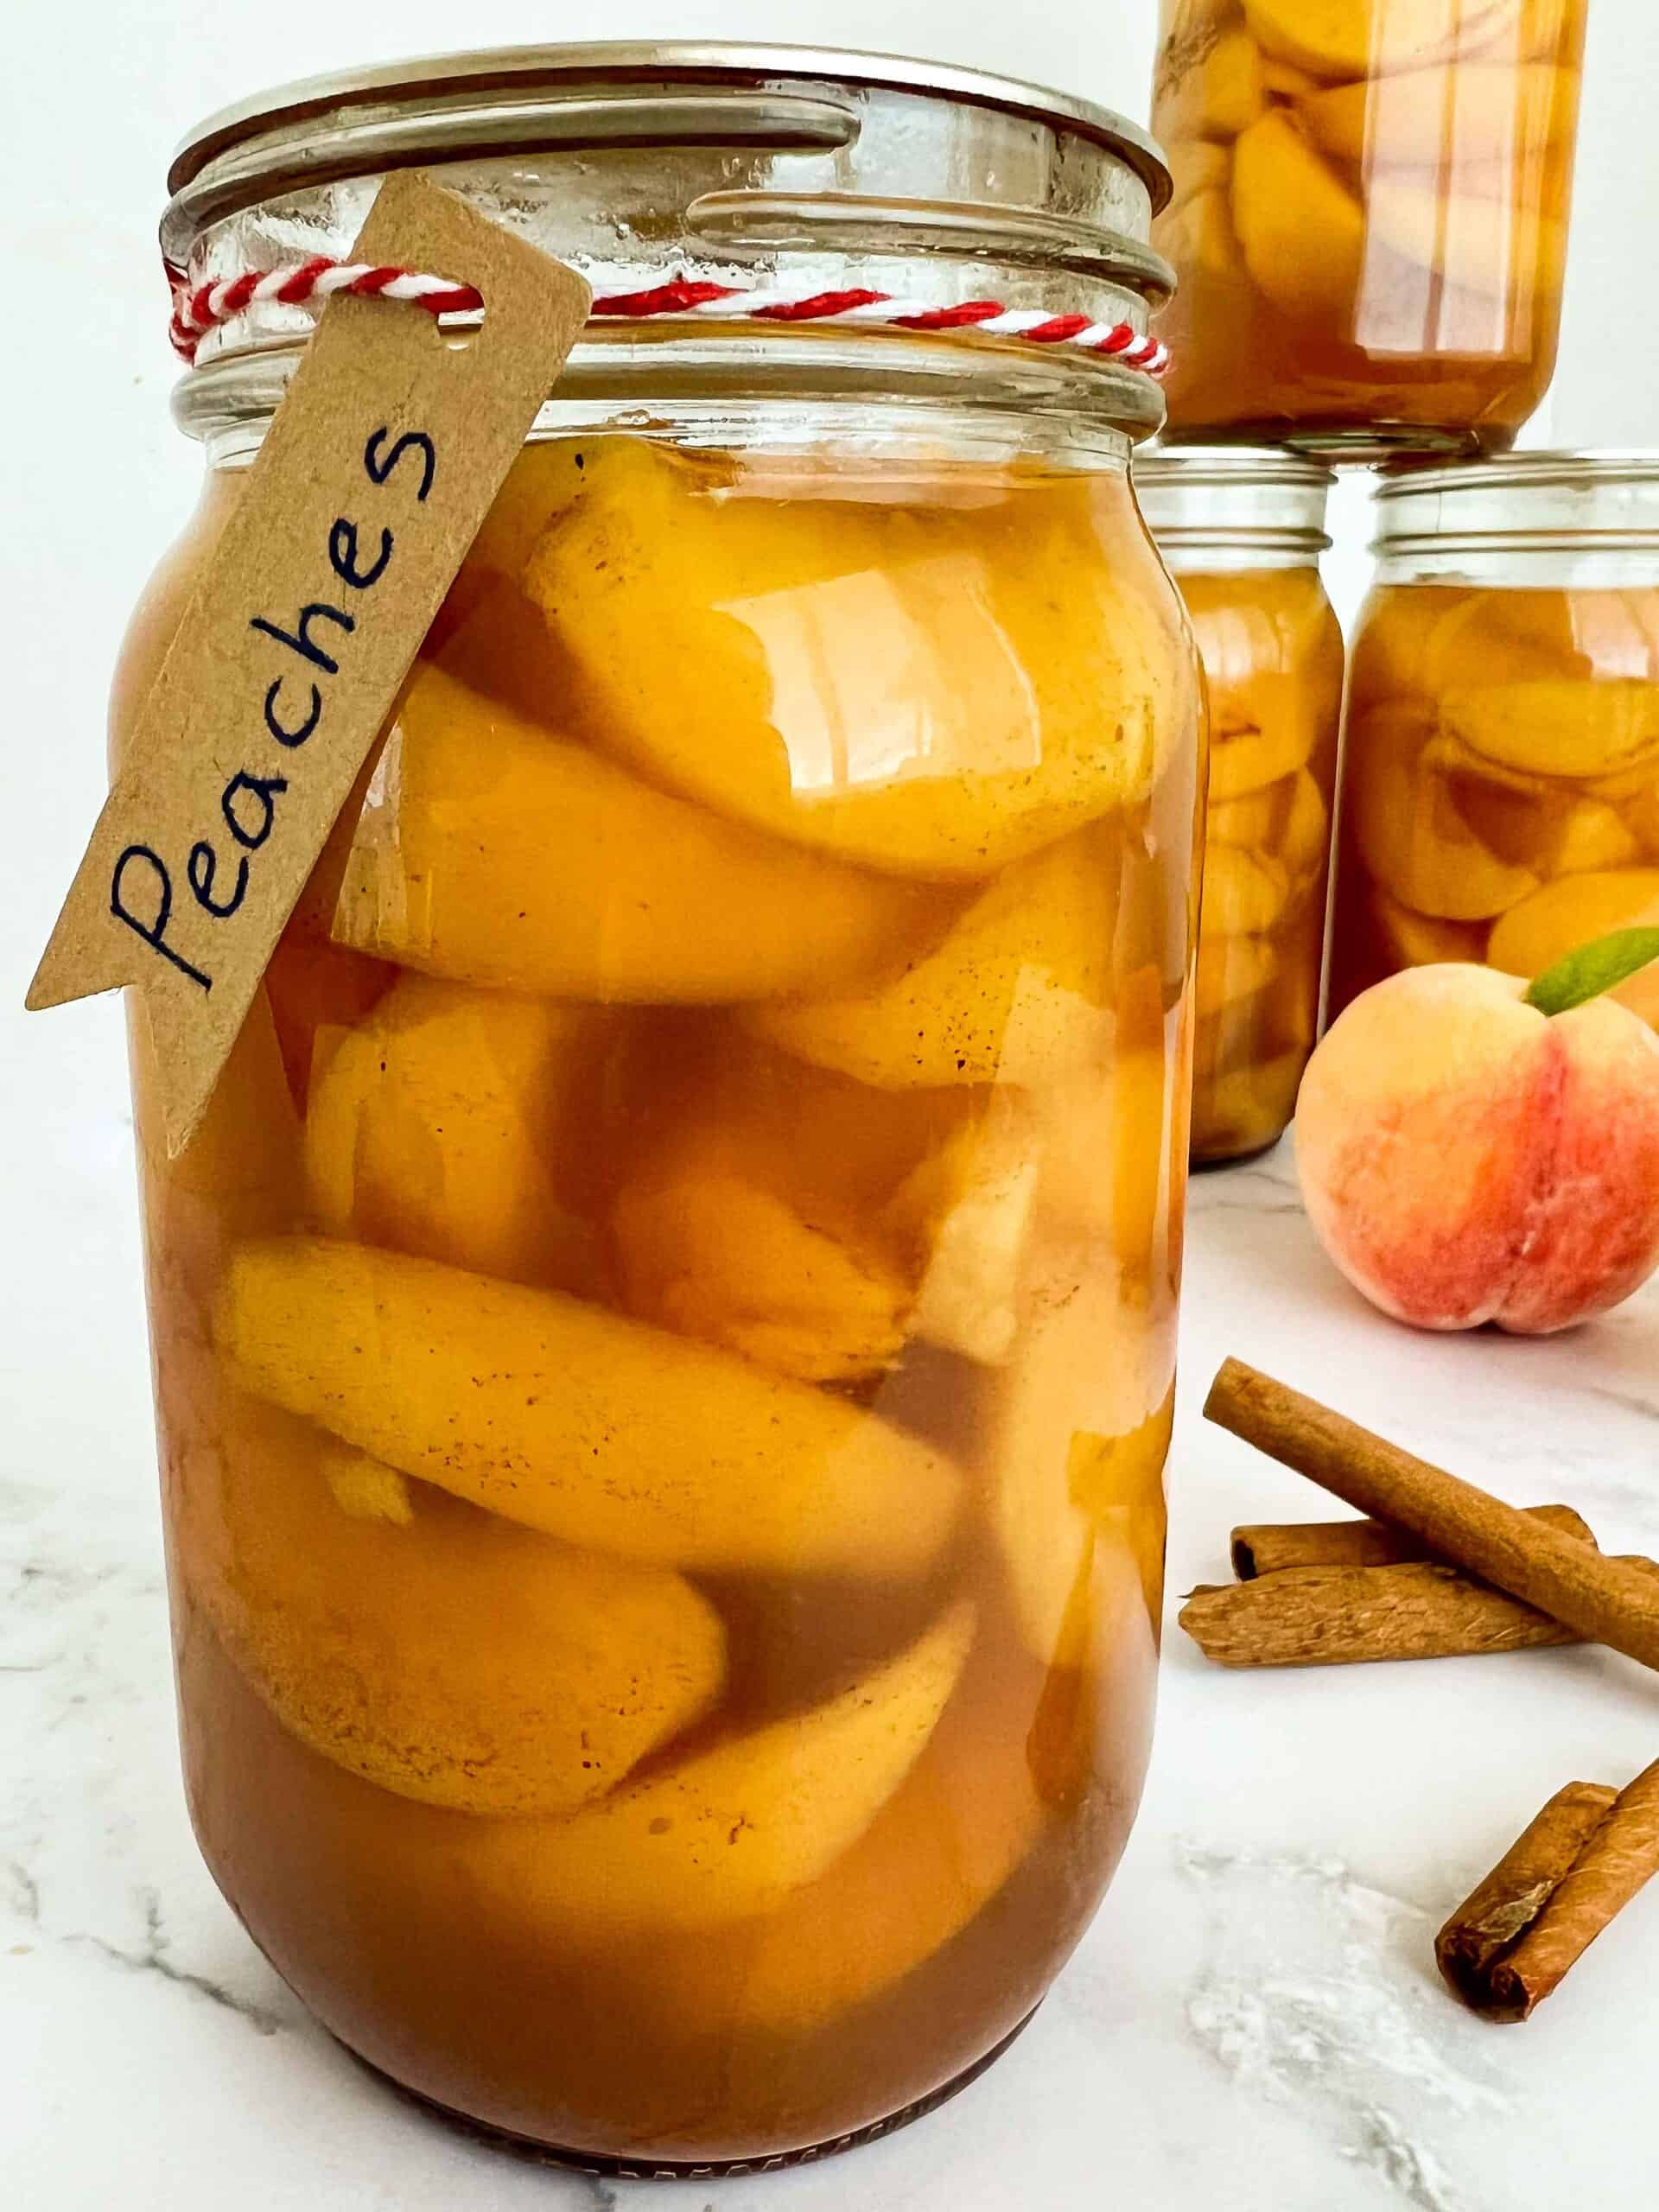 Canned peaches with brown sugar and spices in a jar with a brown paper label and red and white butcher twine.